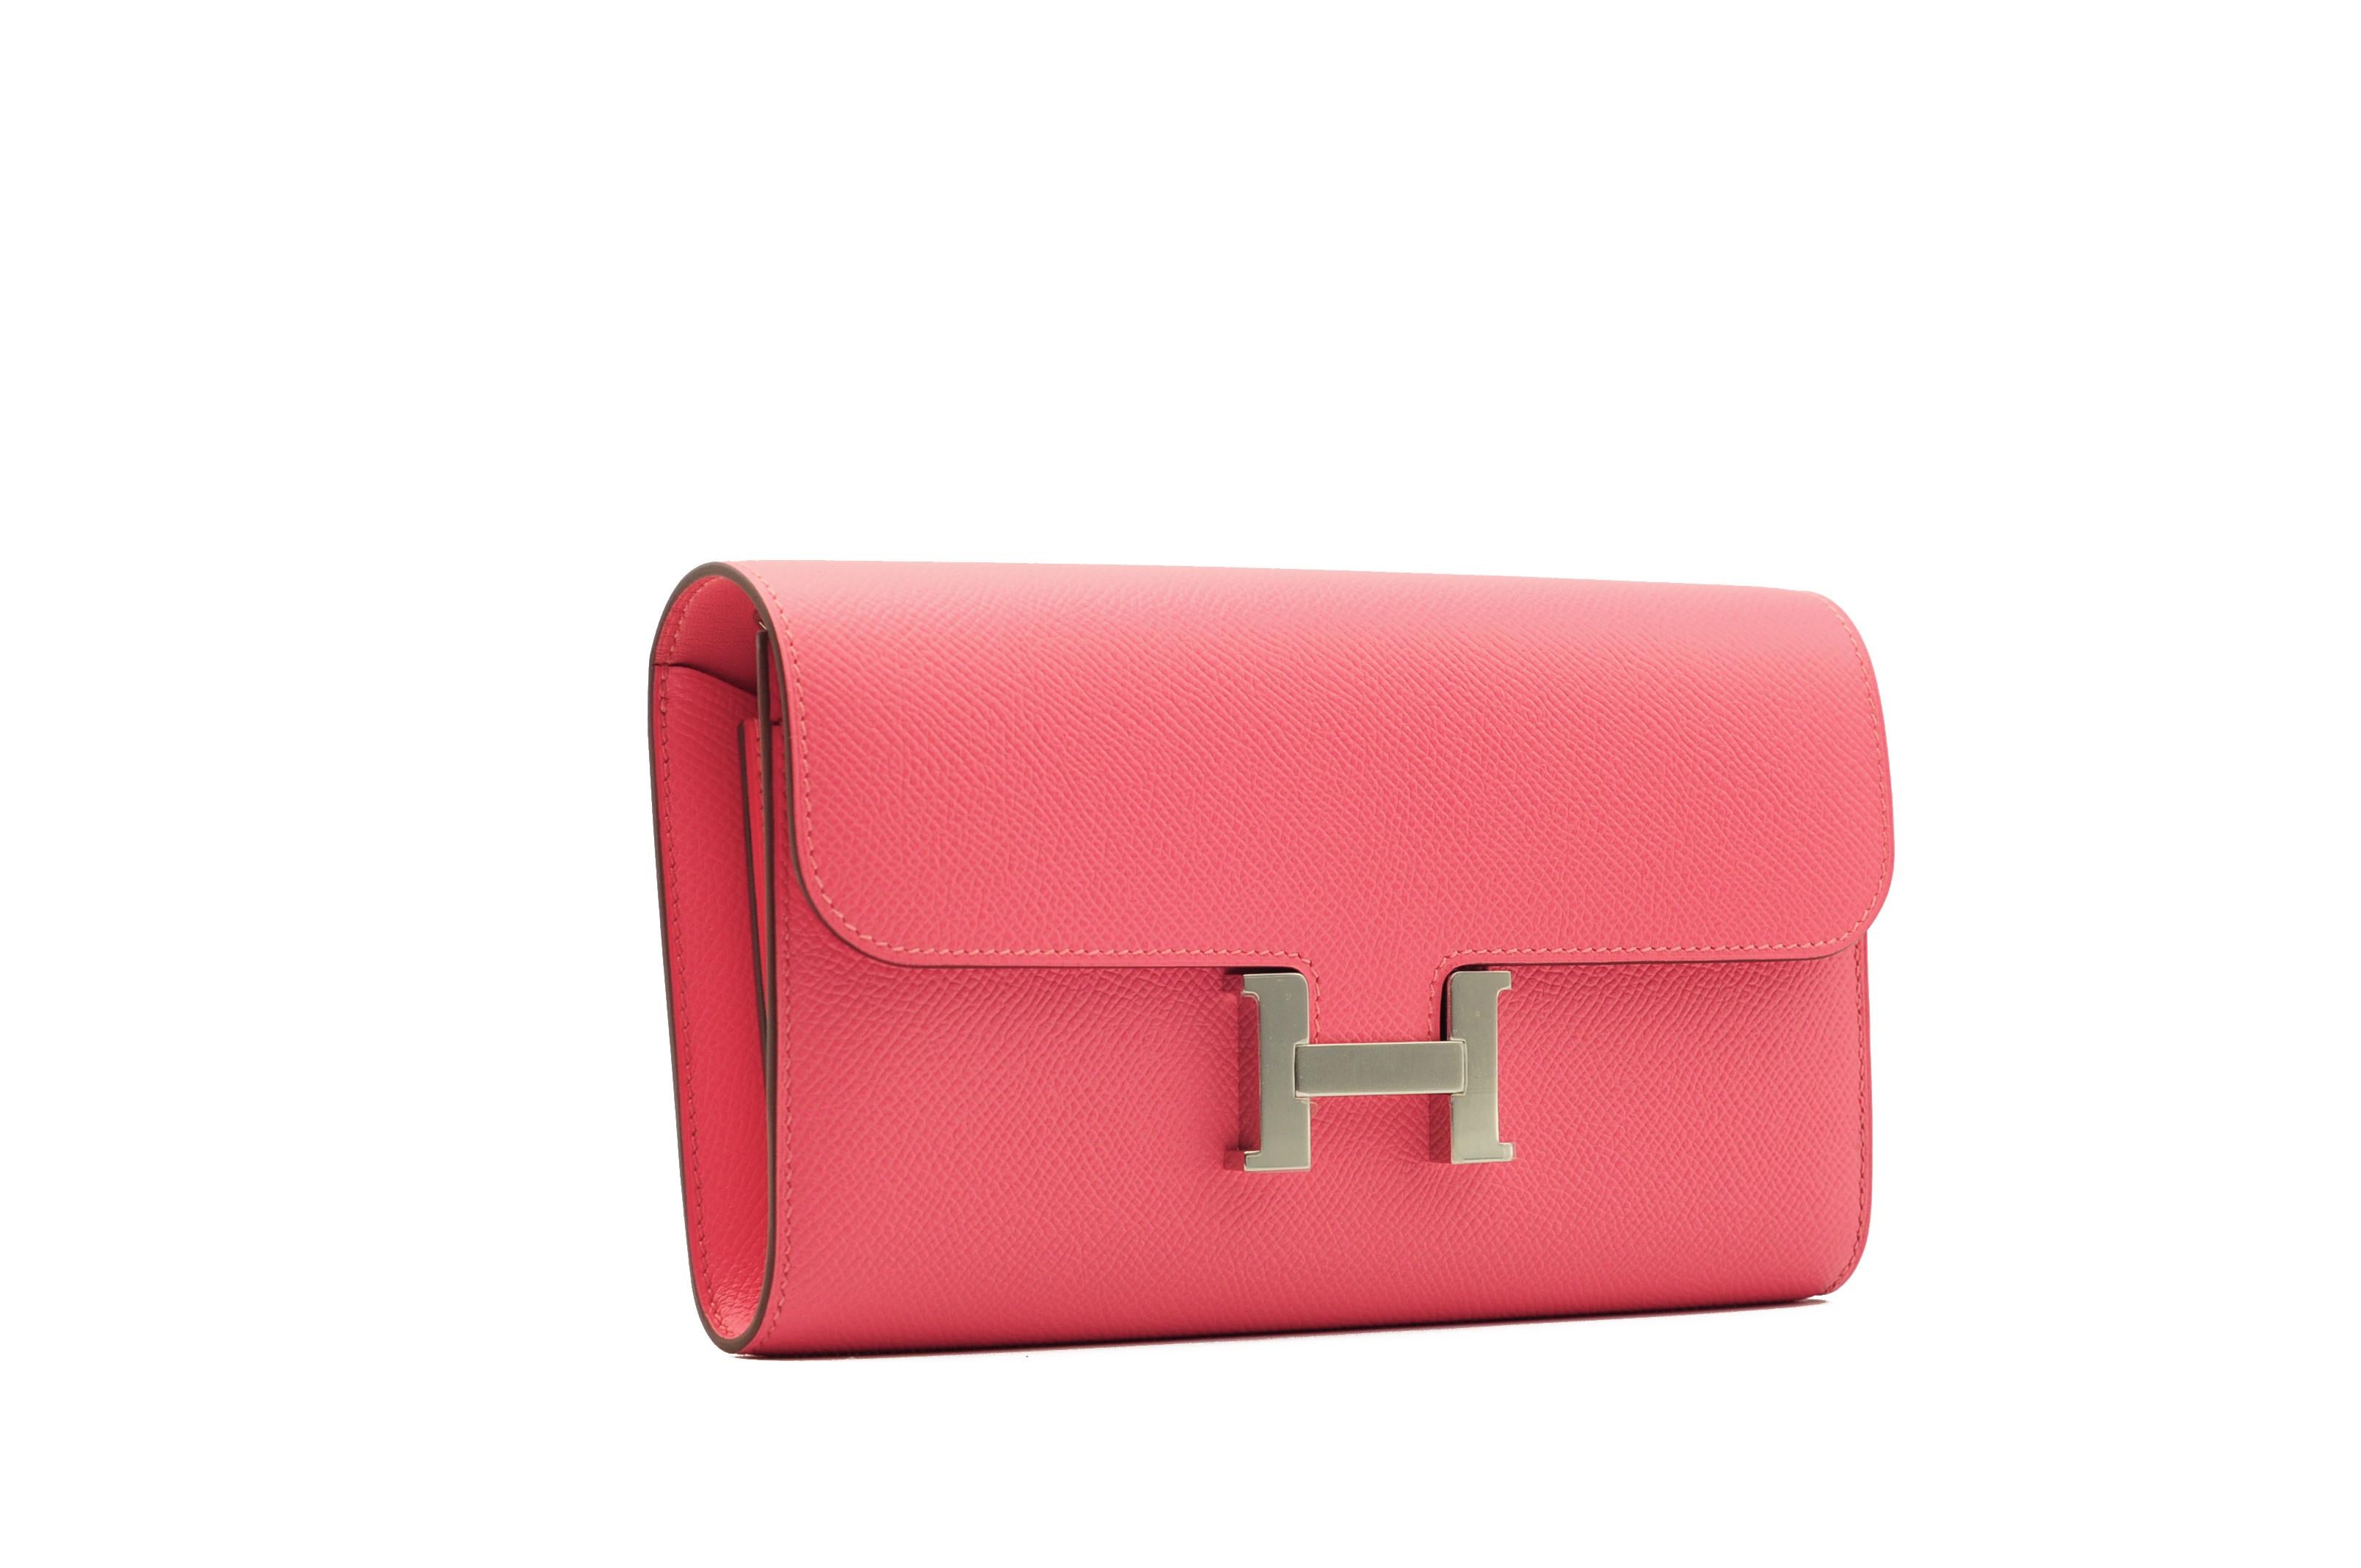 Hermès Constance Wallet Azalee Epsom Leather Palladium Hardware In New Condition In Sydney, New South Wales